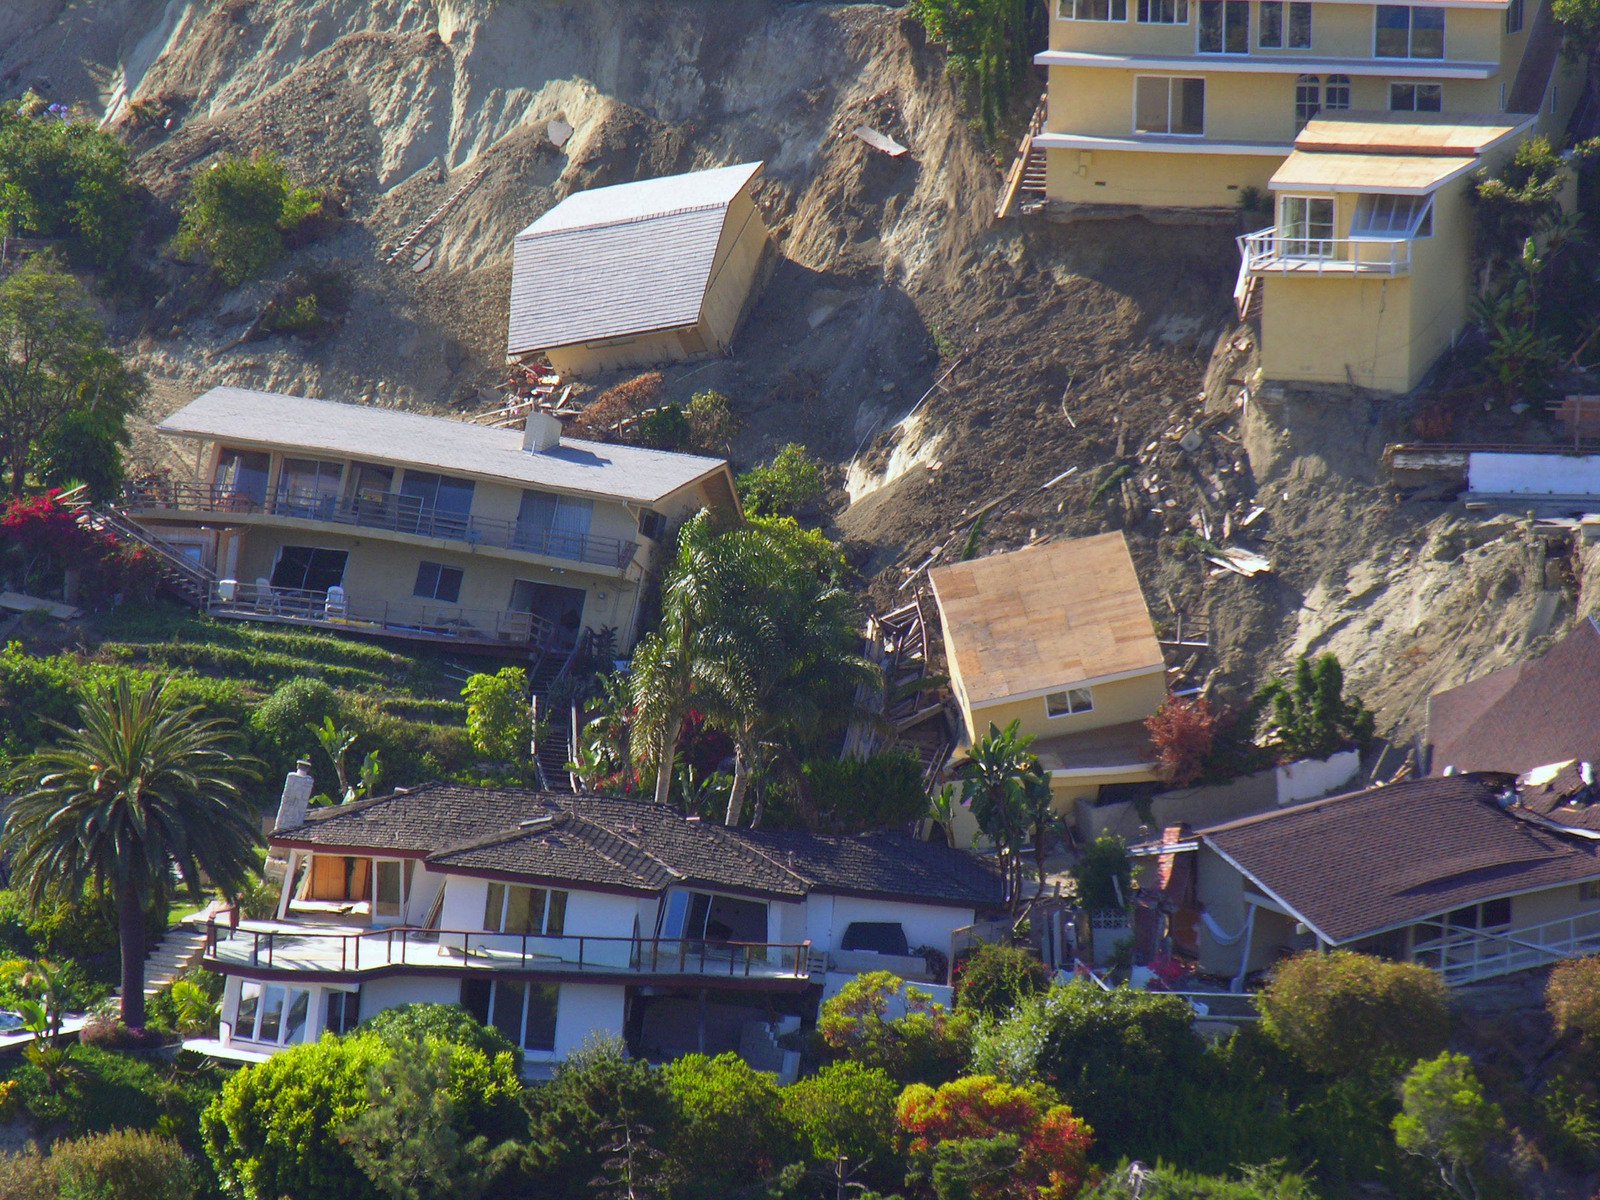 the view of homes that is surrounded by cliffs